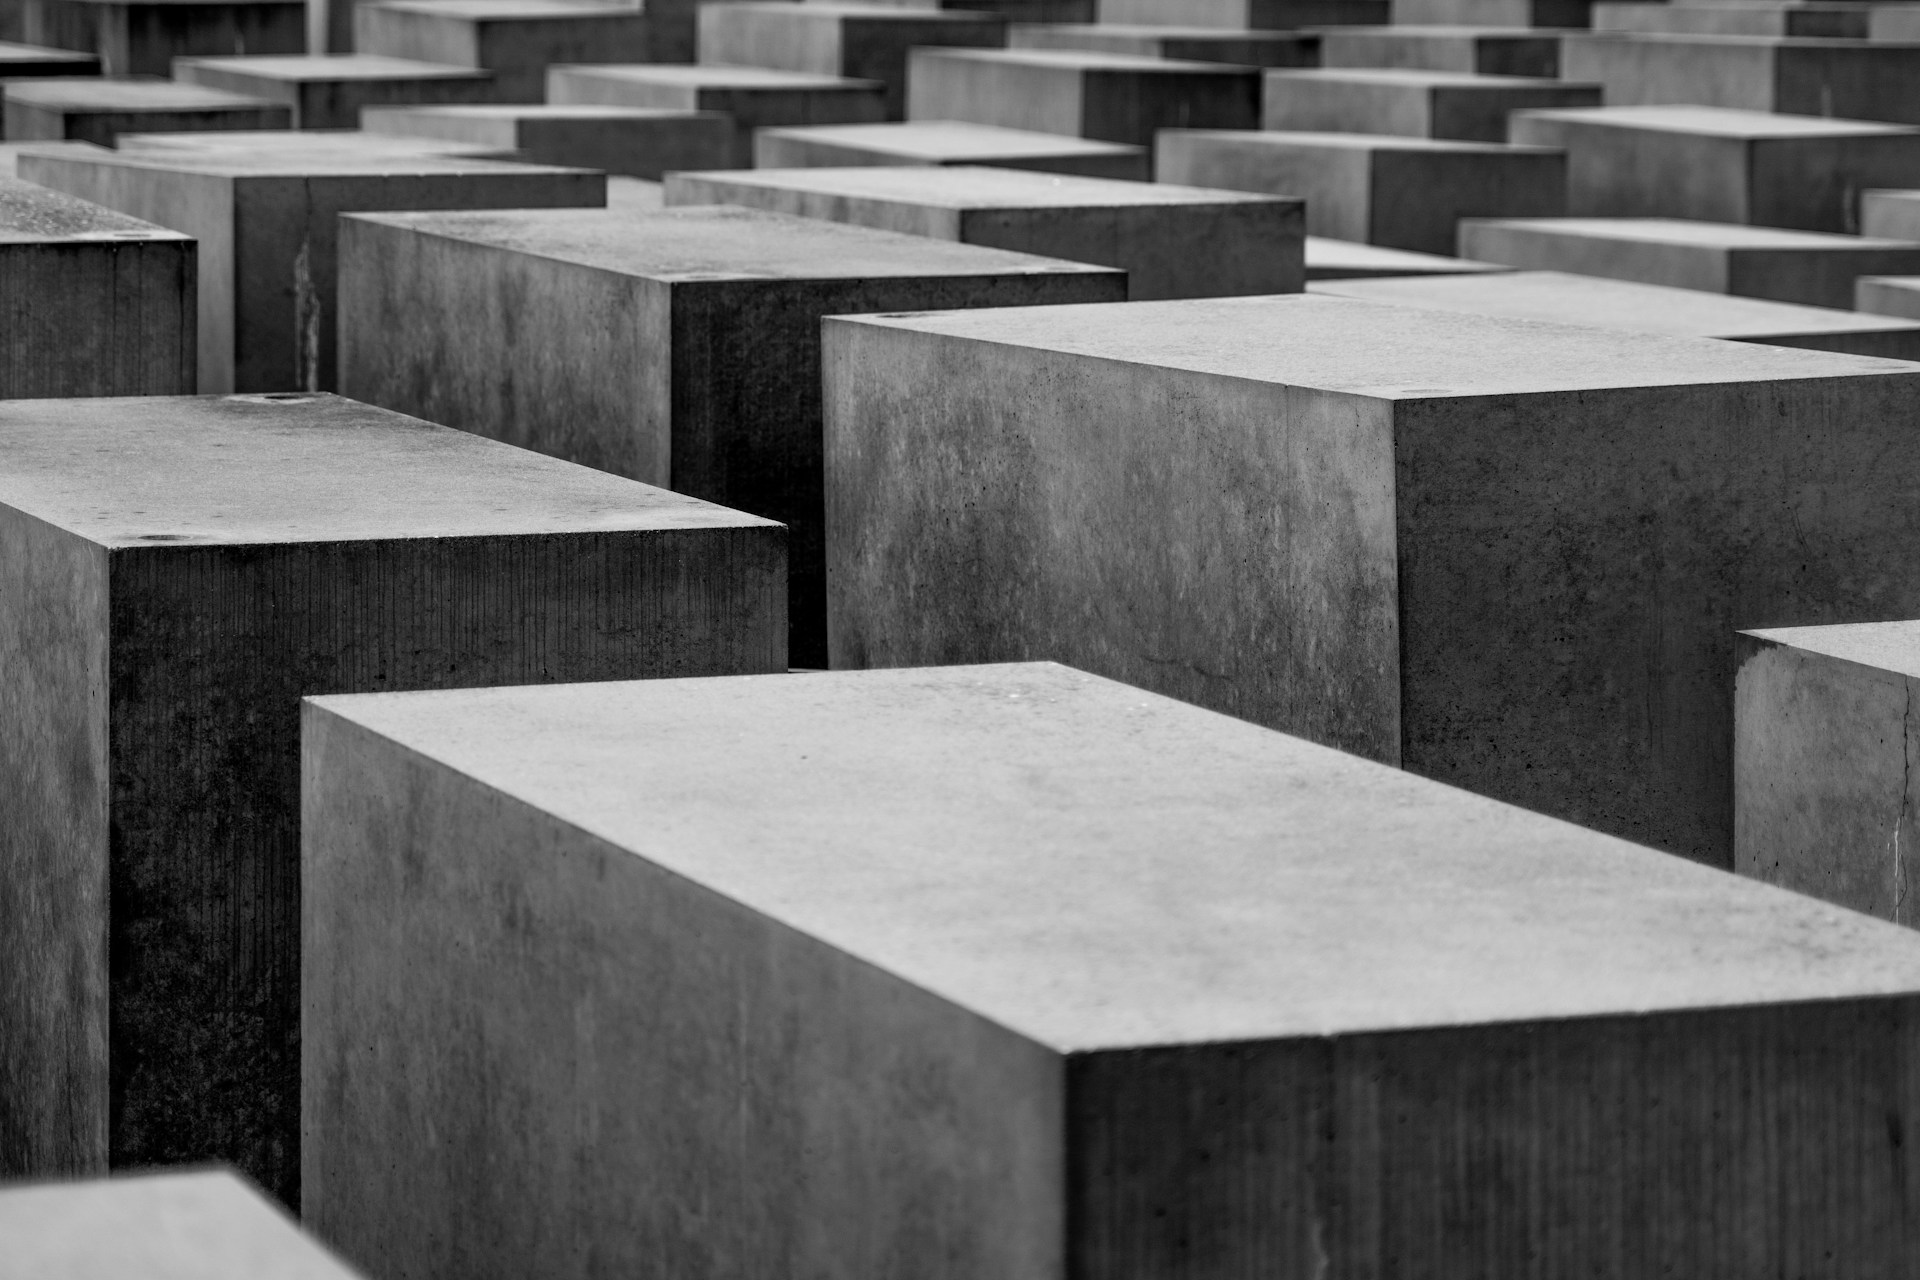 How the social structures of Nazi Germany created a bystander society